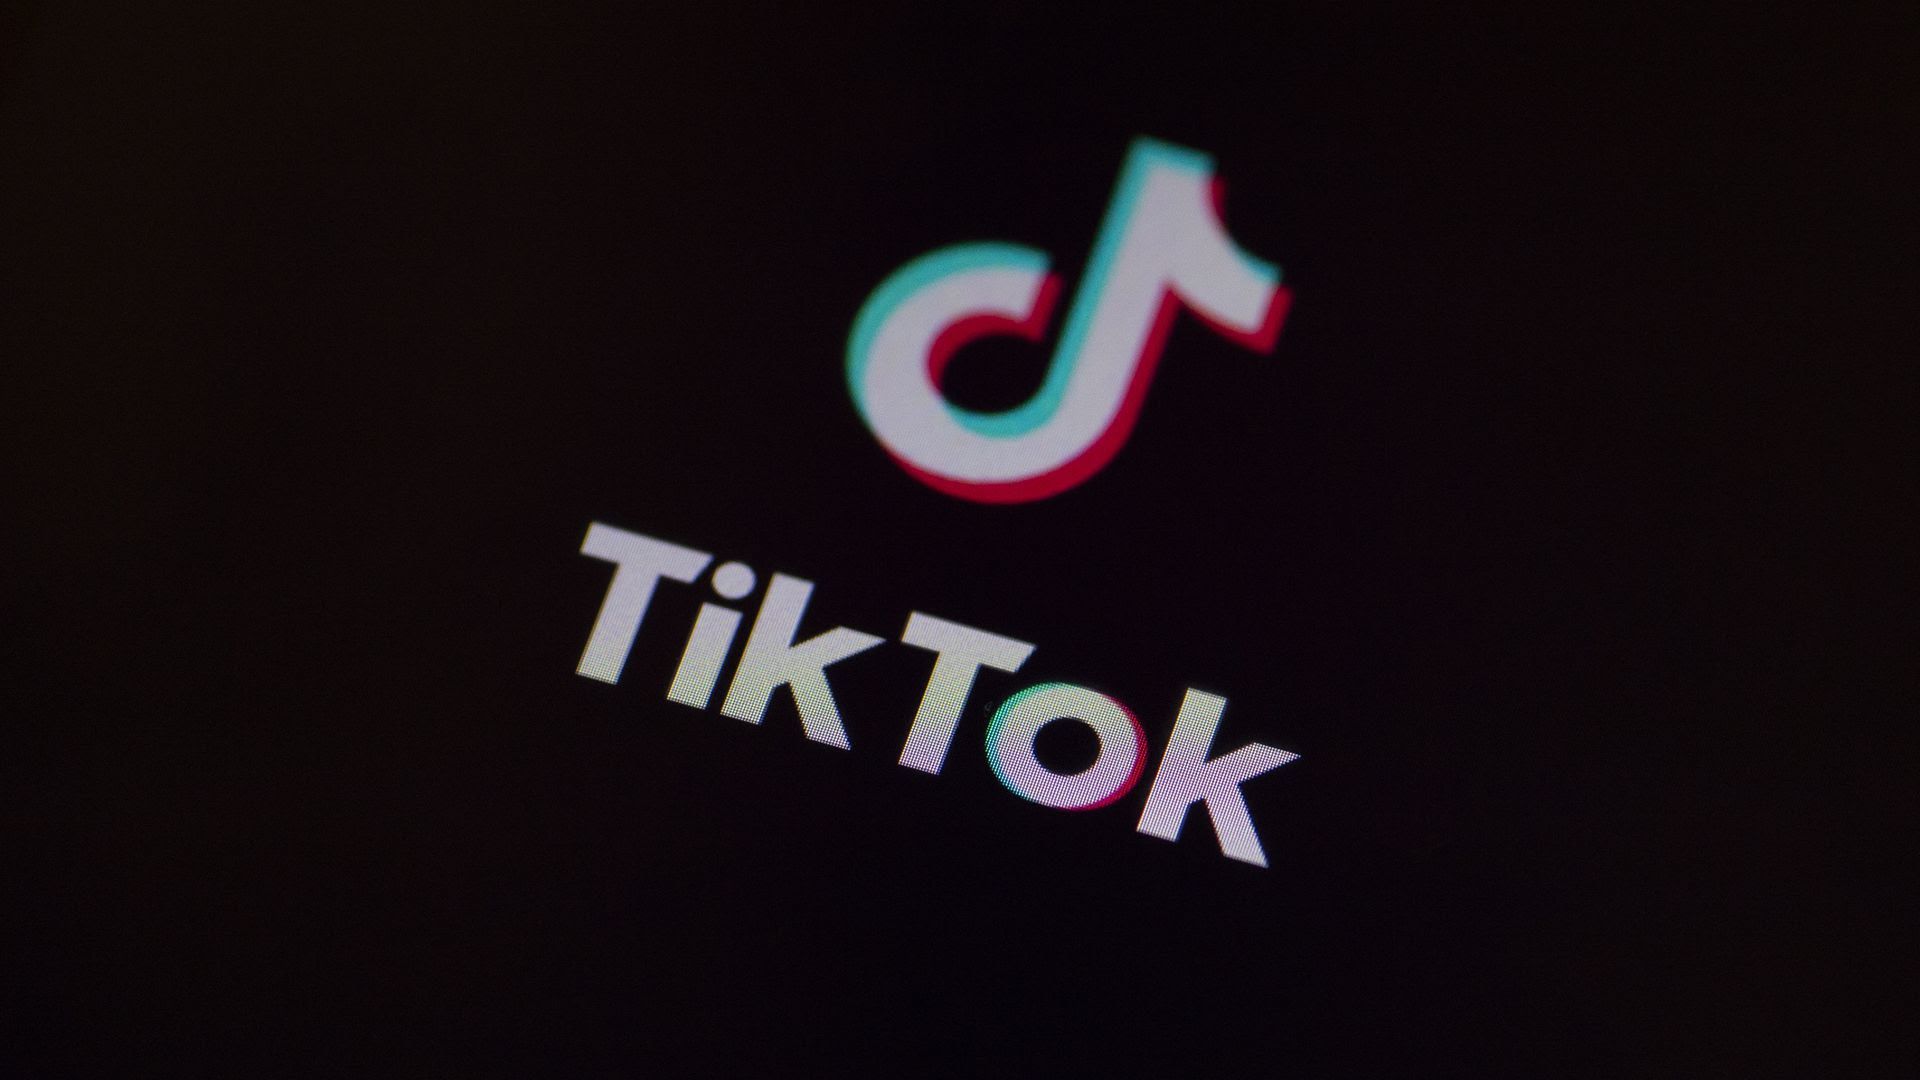 A TikTok logo is seen on a mobile device. Photo: Yichuan Cao/NurPhoto via Getty Images